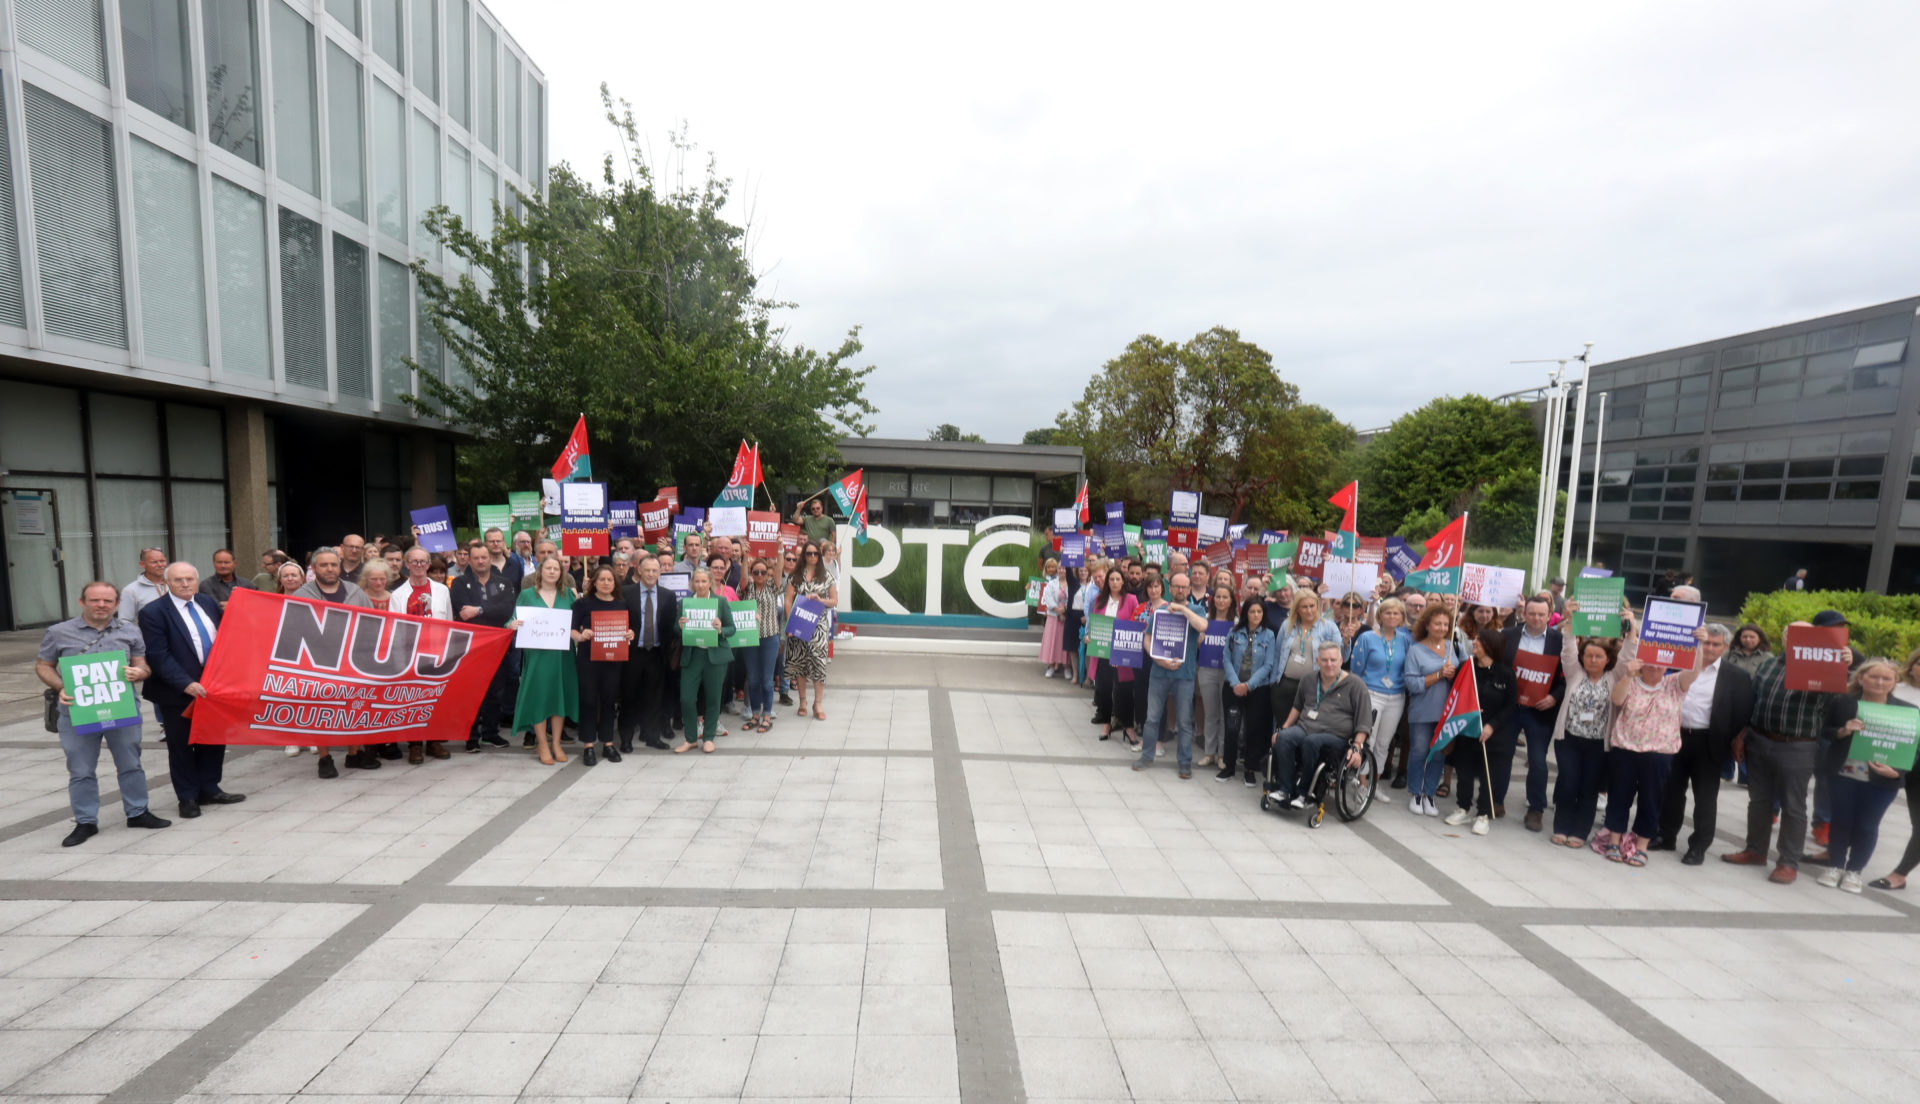 Members of the NUJ union protesting at RTÉ studios in Dublin over Ryan Tubridy's financial arrangements and money payments.